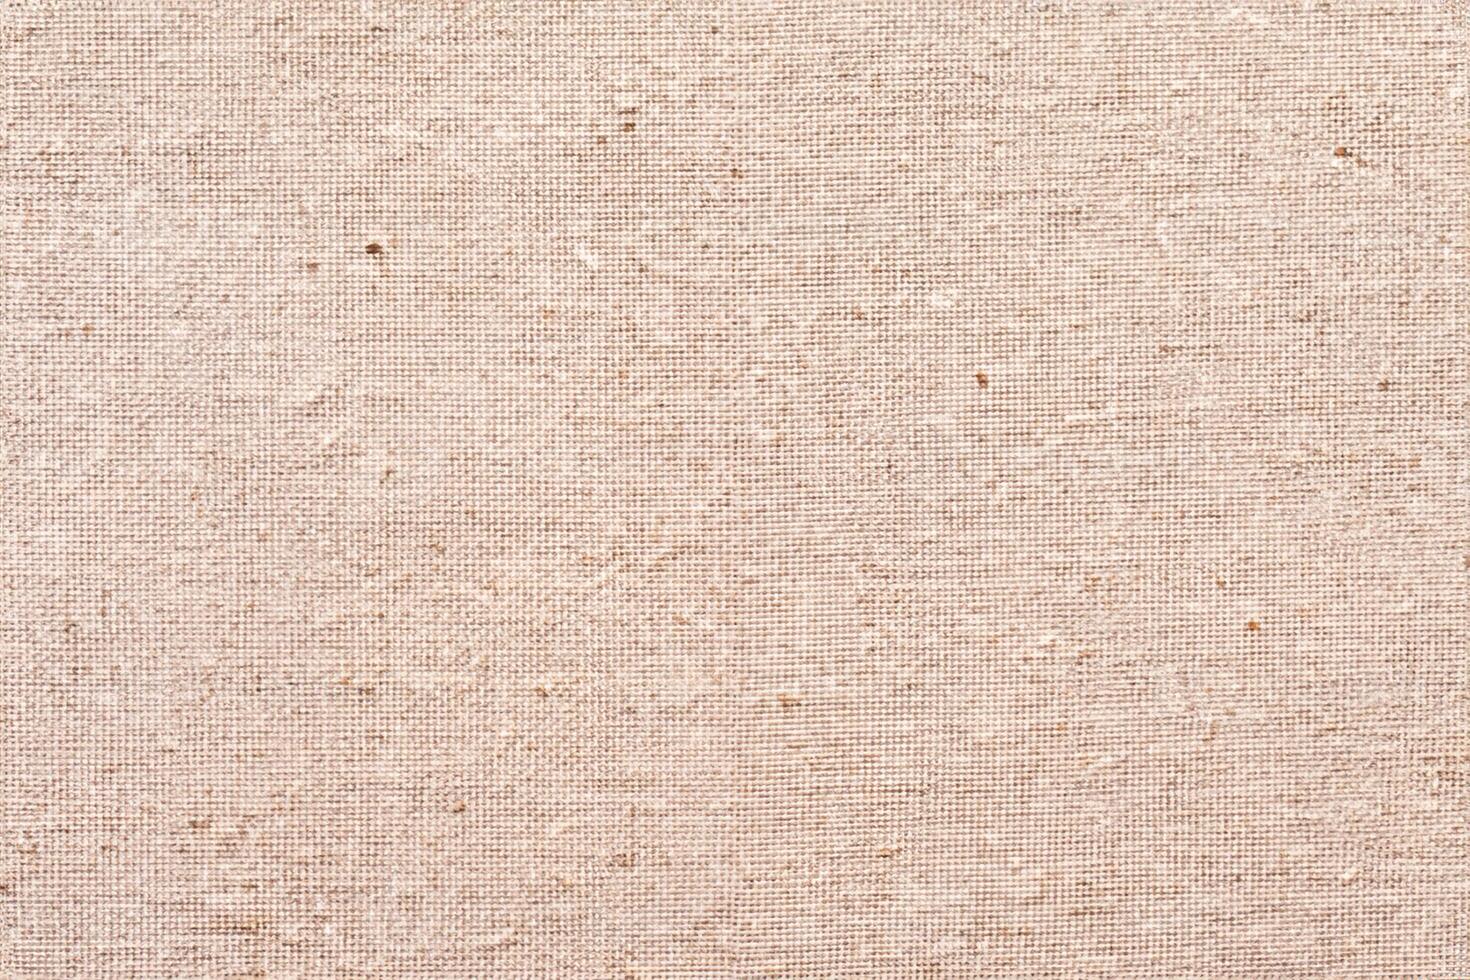 a close up of a beige paper texture photo